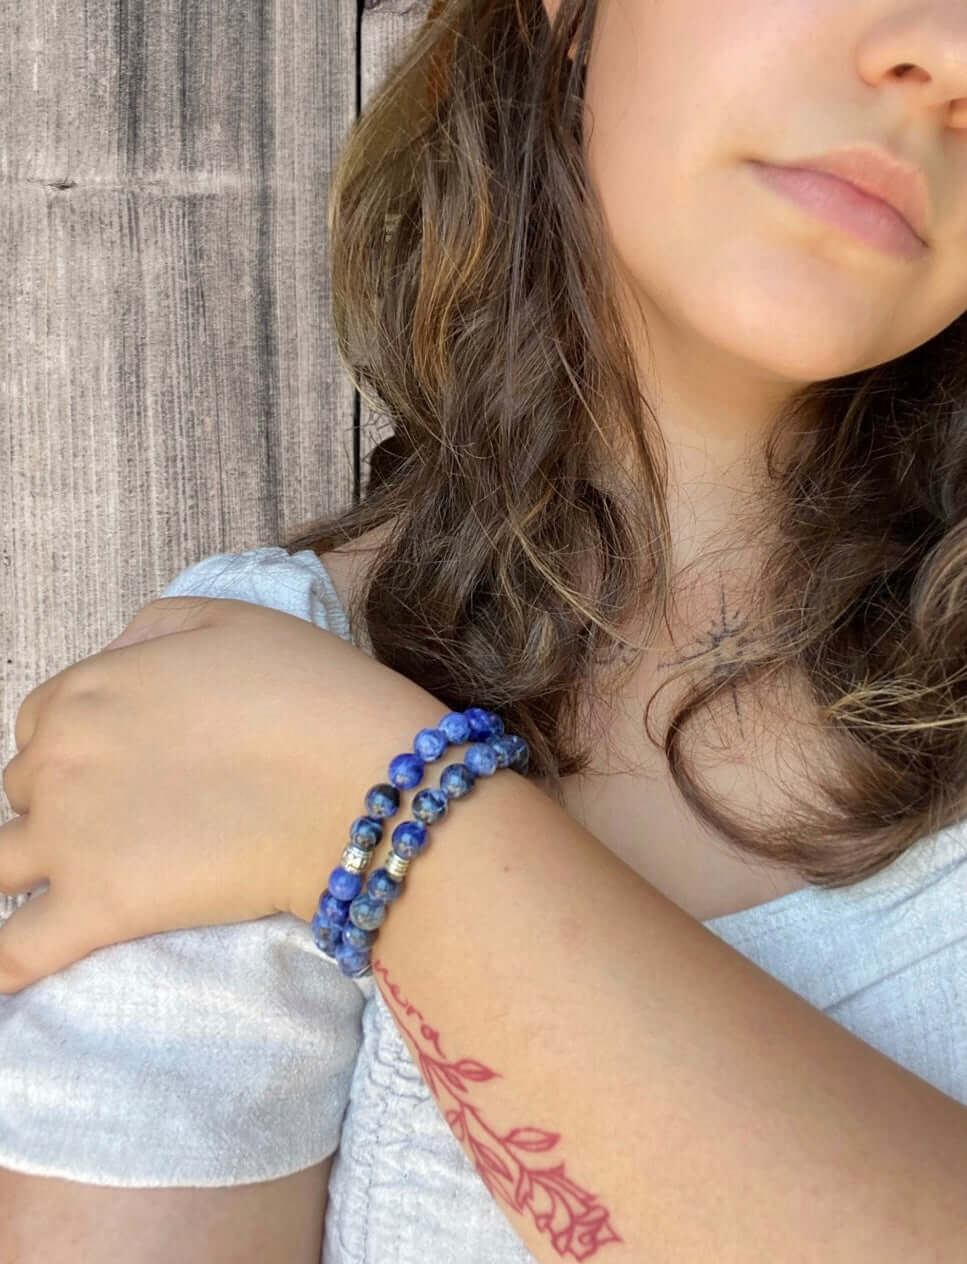 Lapis Lazuli Bead Bracelet This bracelet is made with high-quality Lapis Lazuli stones which bring wisdom to the wearer. Zodiac: Sagittarius and Libra. Chakras: Third Eye, Crown, and Throat. Handmade with authentic crystals & gemstones in Minneapolis, MN.